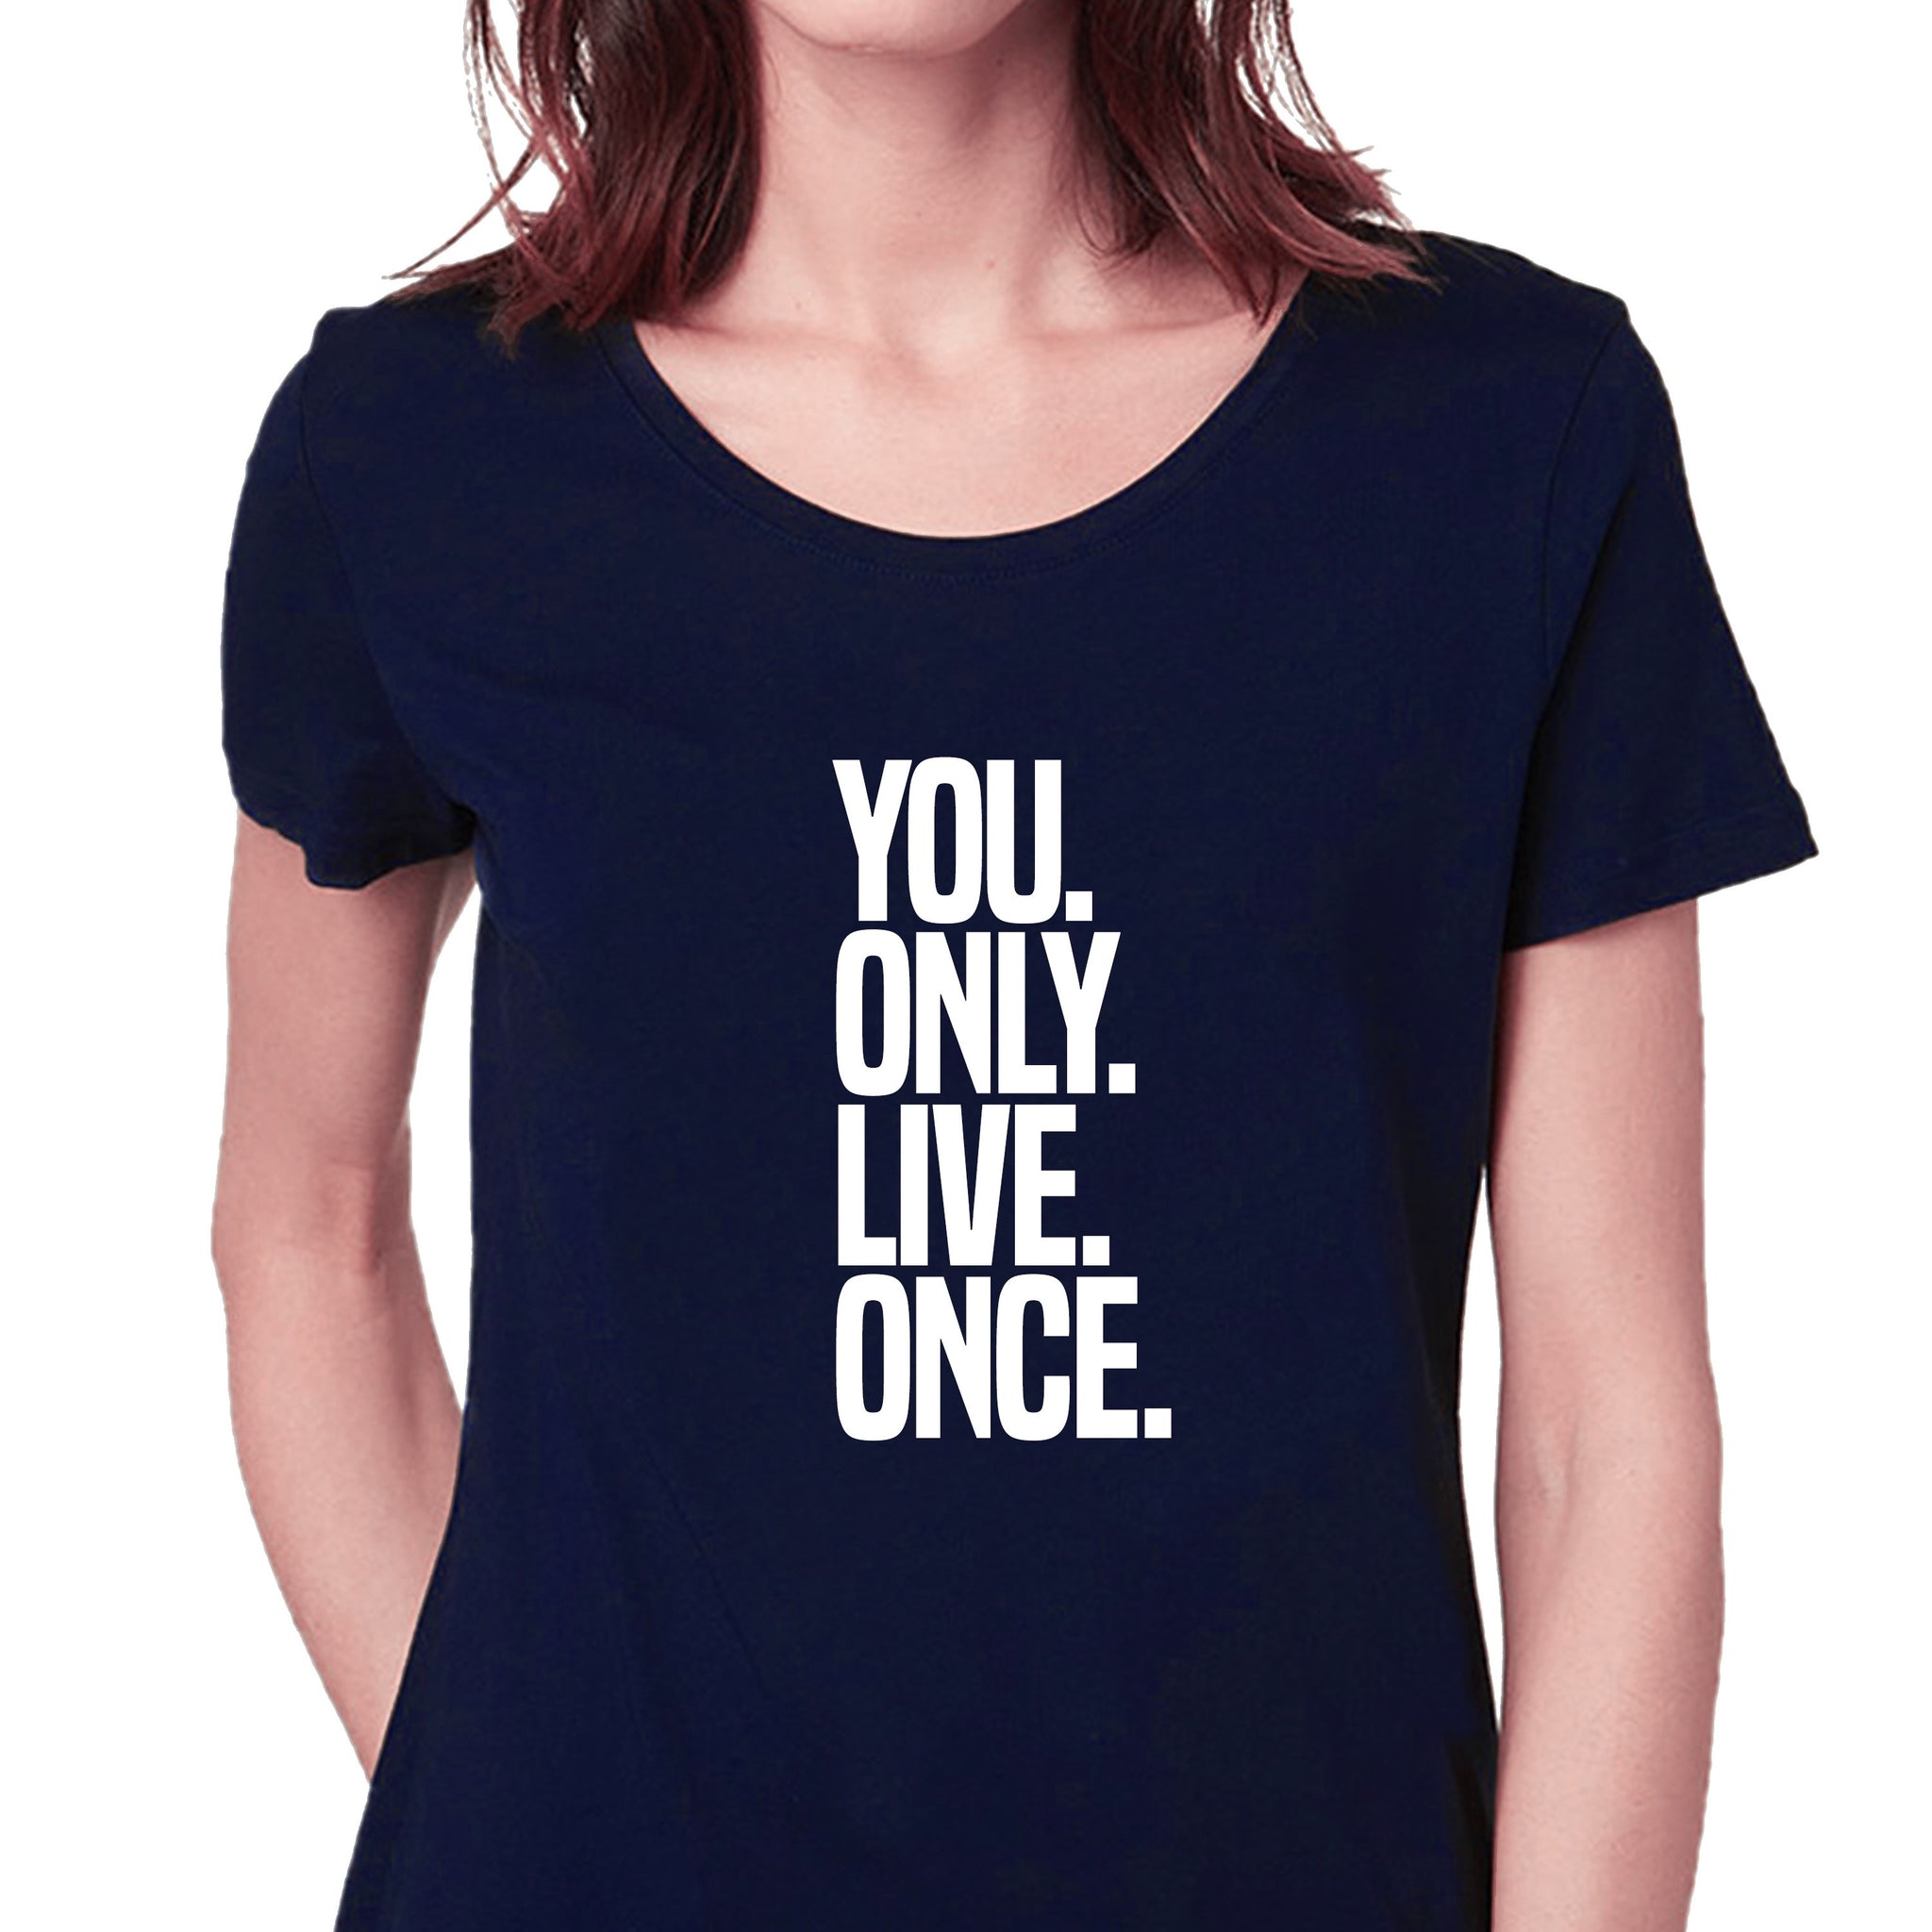 You Only Live Once T-shirt for Women - Let's Beach